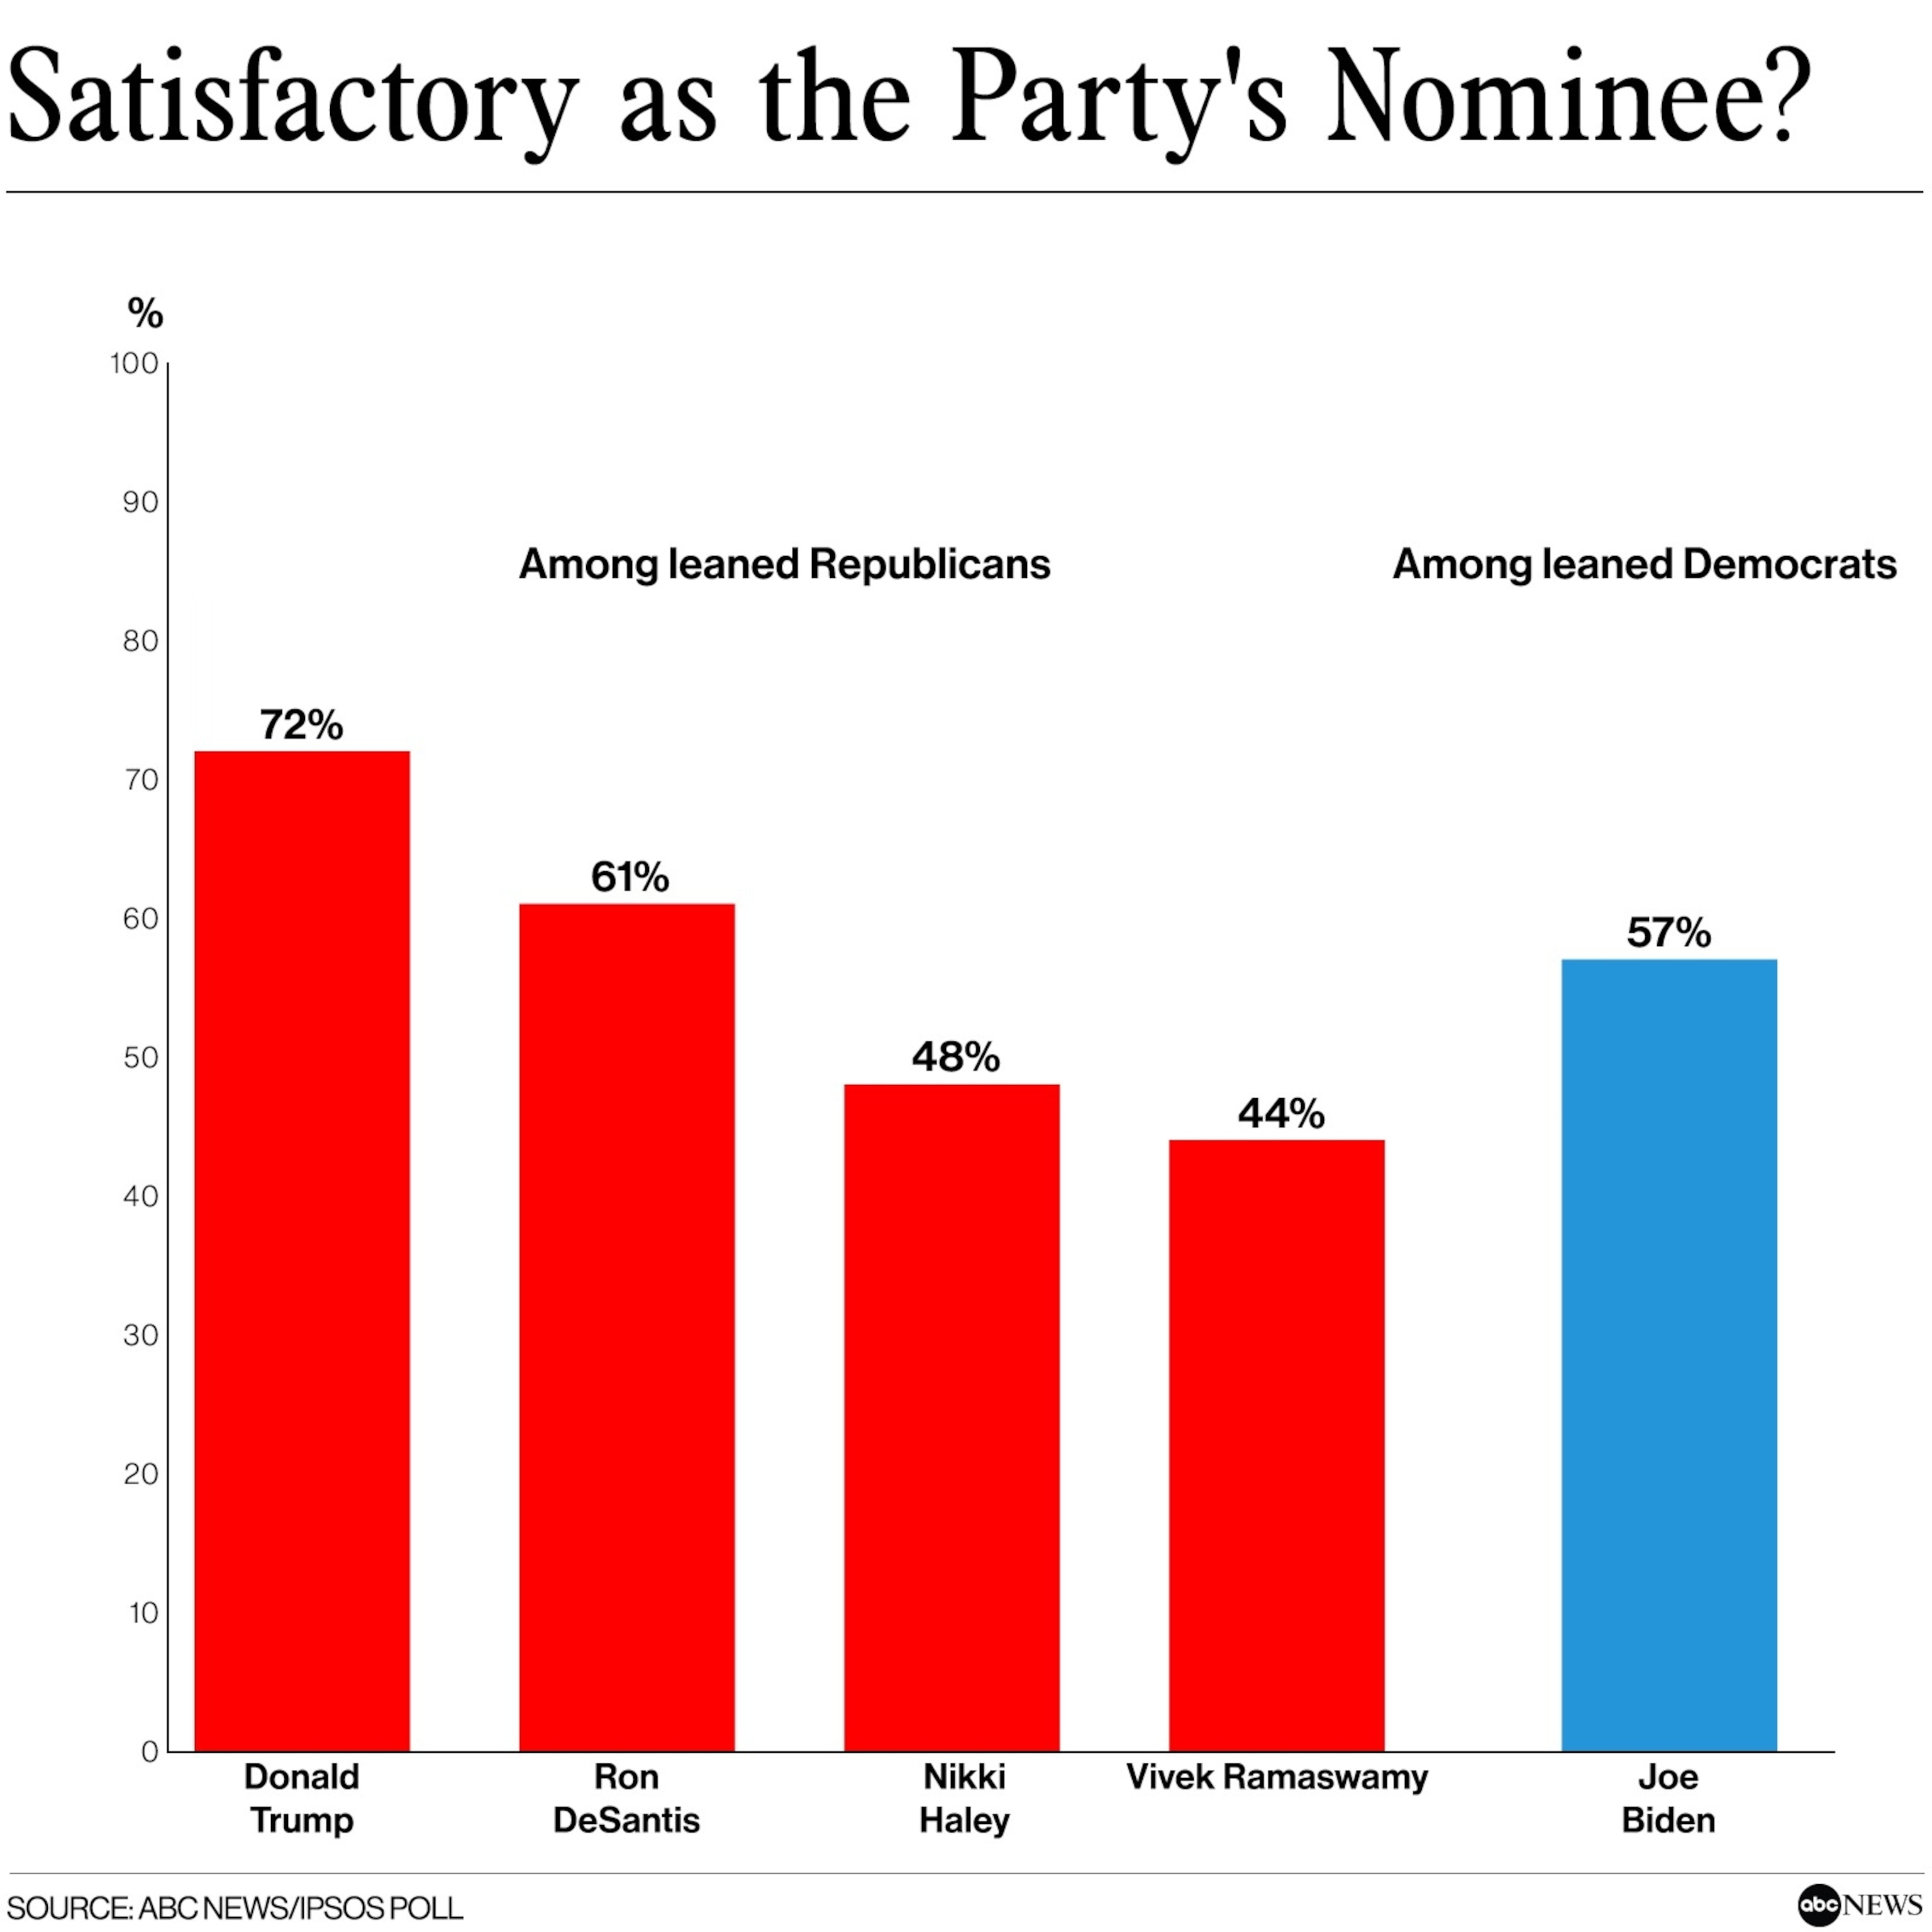 PHOTO: Satisfactory as the Party's Nominee?